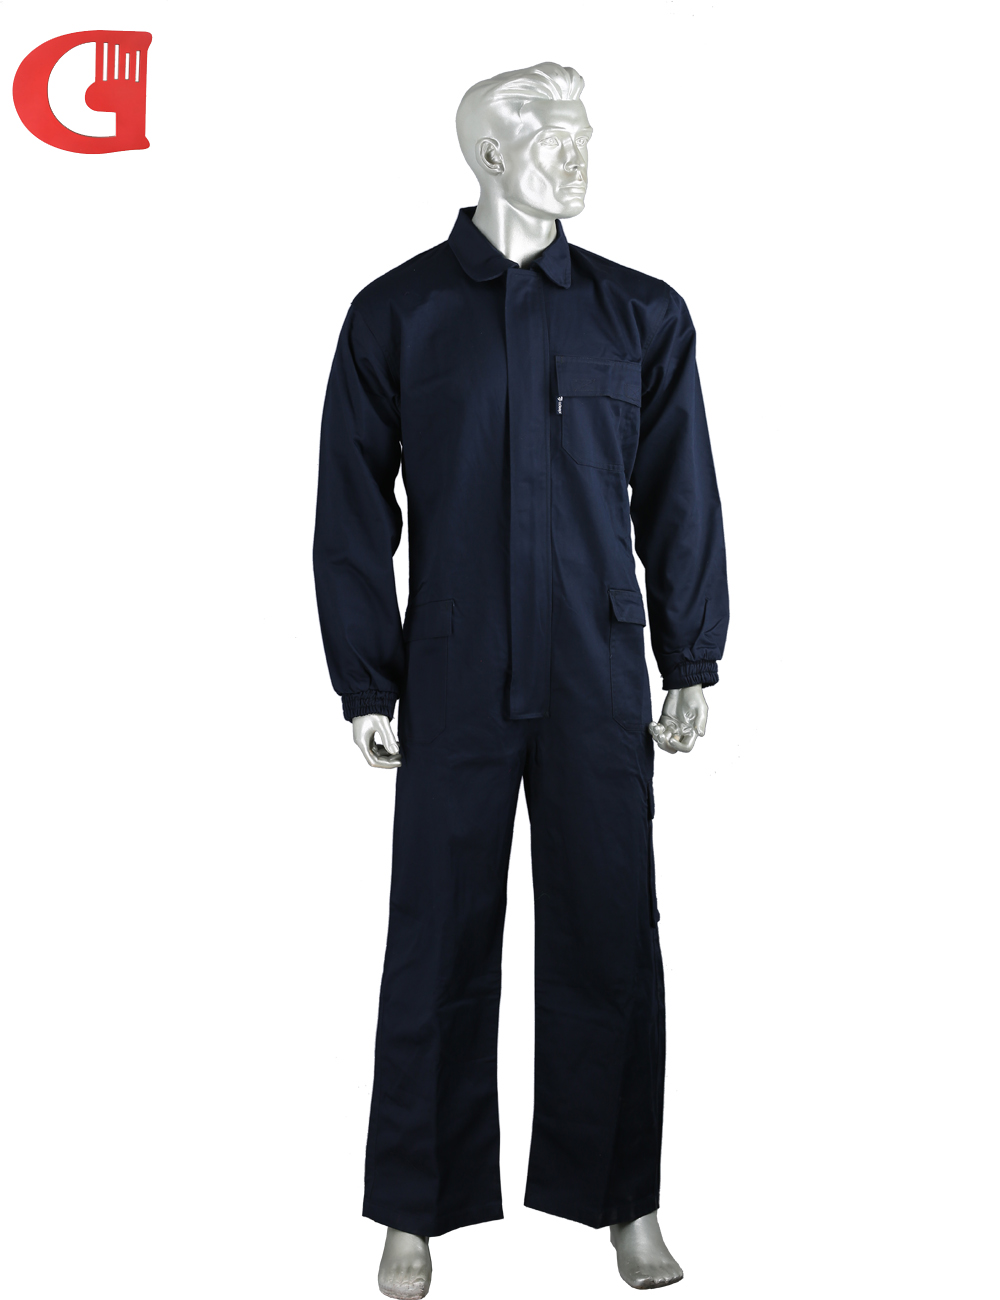 Flame Retardant Work Clothes 100% Cotton Flame resistant Workwear Coveralls